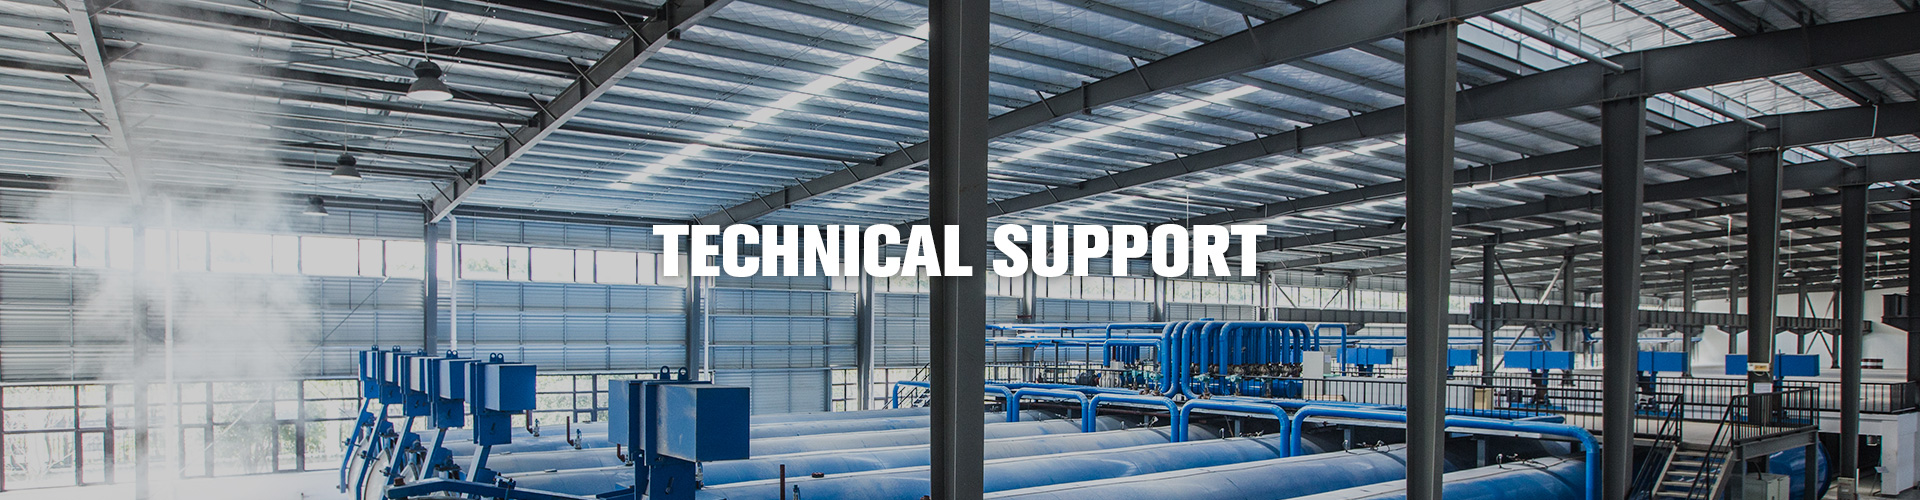 Steel Structure Technical Support|Steel Structure Custom Design